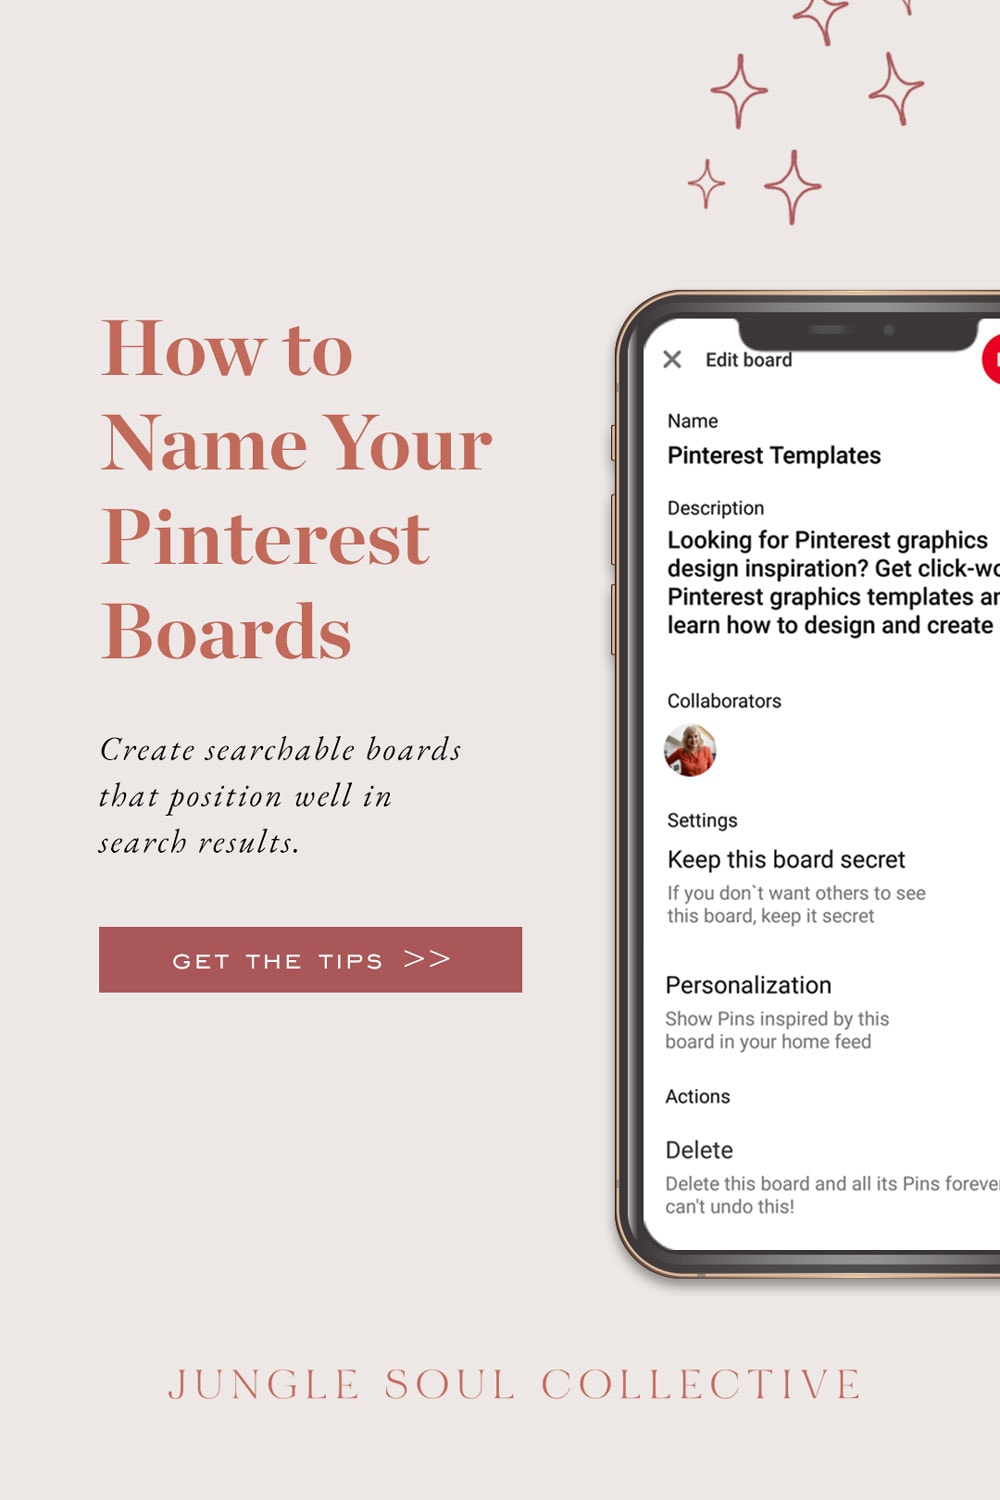 How to Optimize Your Pinterest Boards